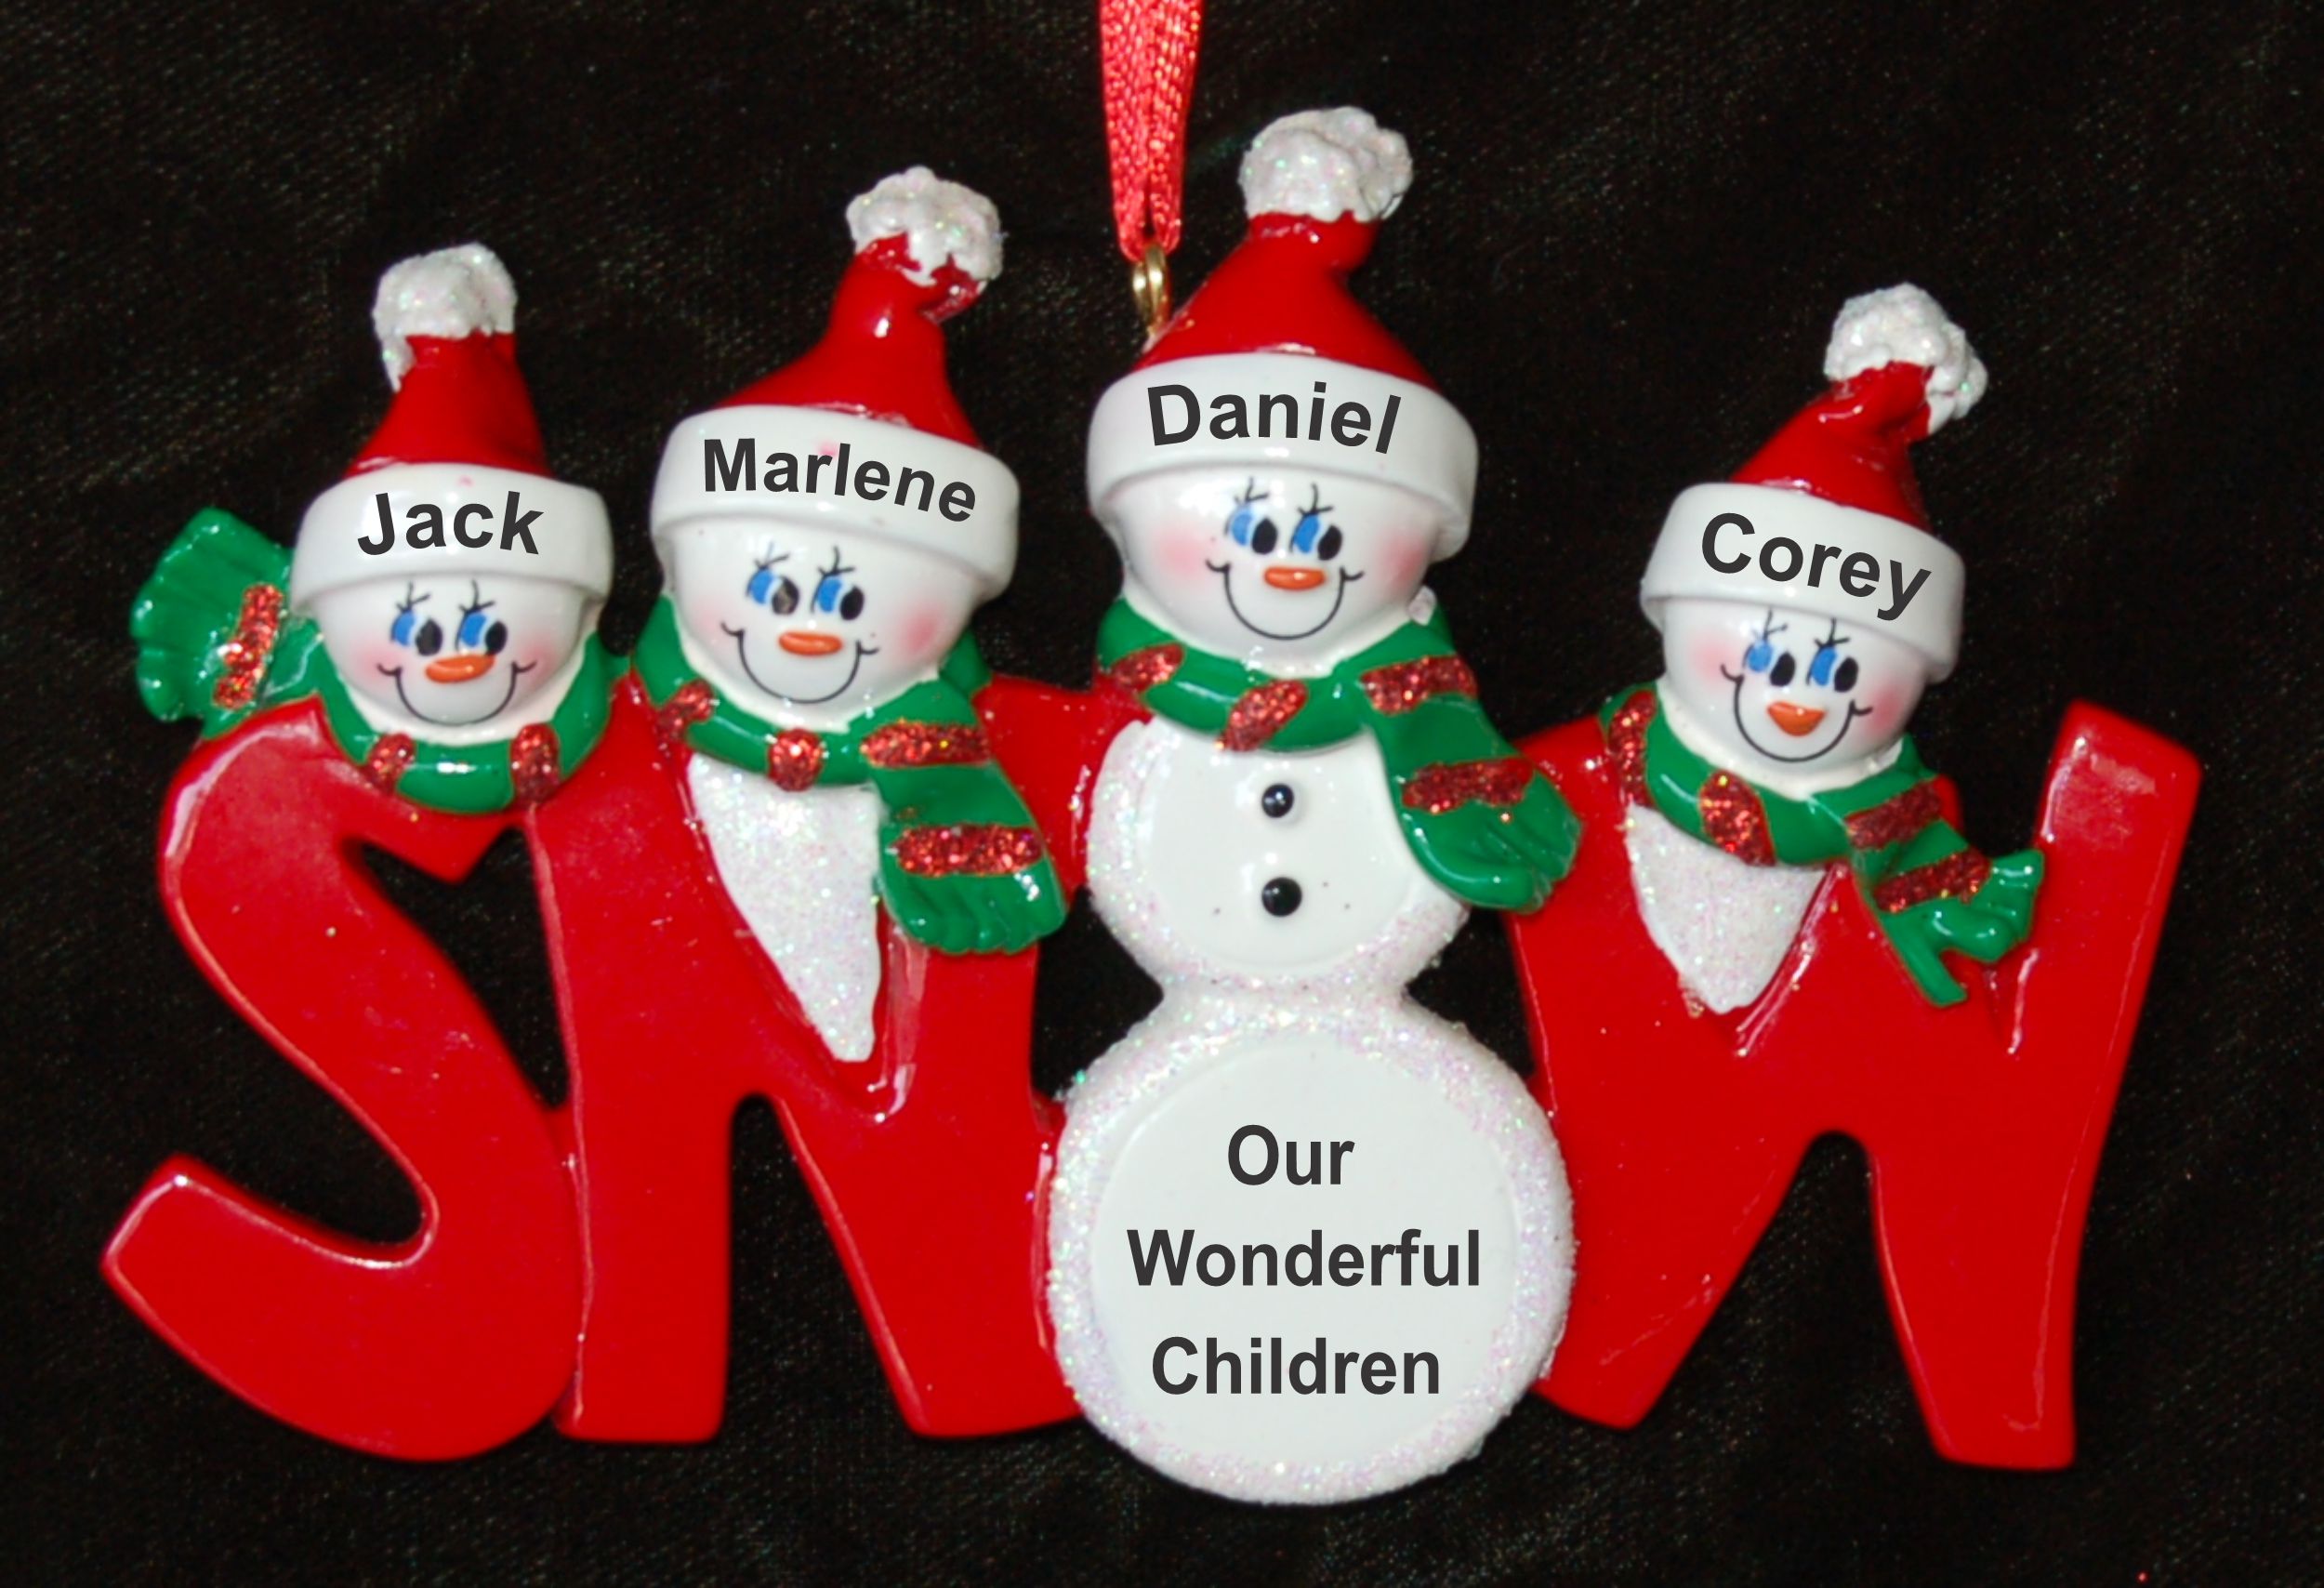 Family Christmas Ornament Snow Much Fun Just the Kids 4 Personalized by RussellRhodes.com